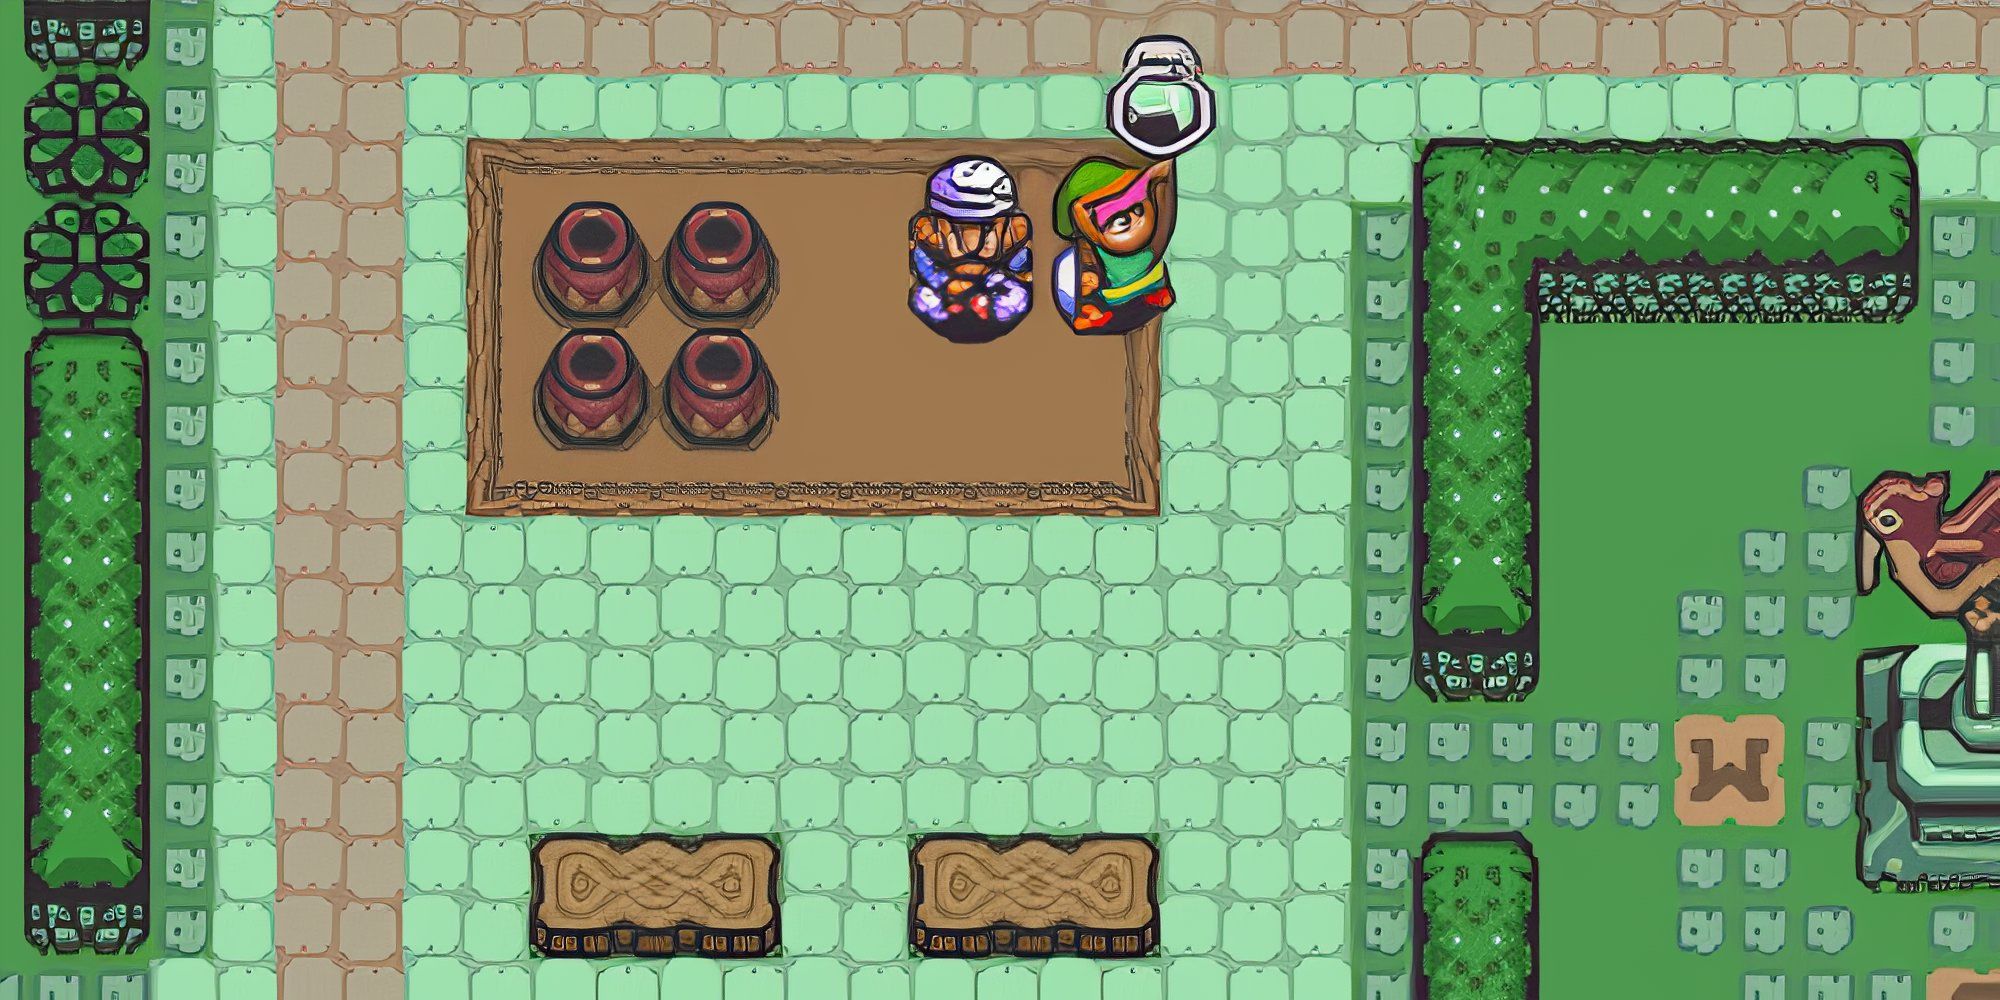 Getting the Magic Bottle in The Legend of Zelda A Link to the Past